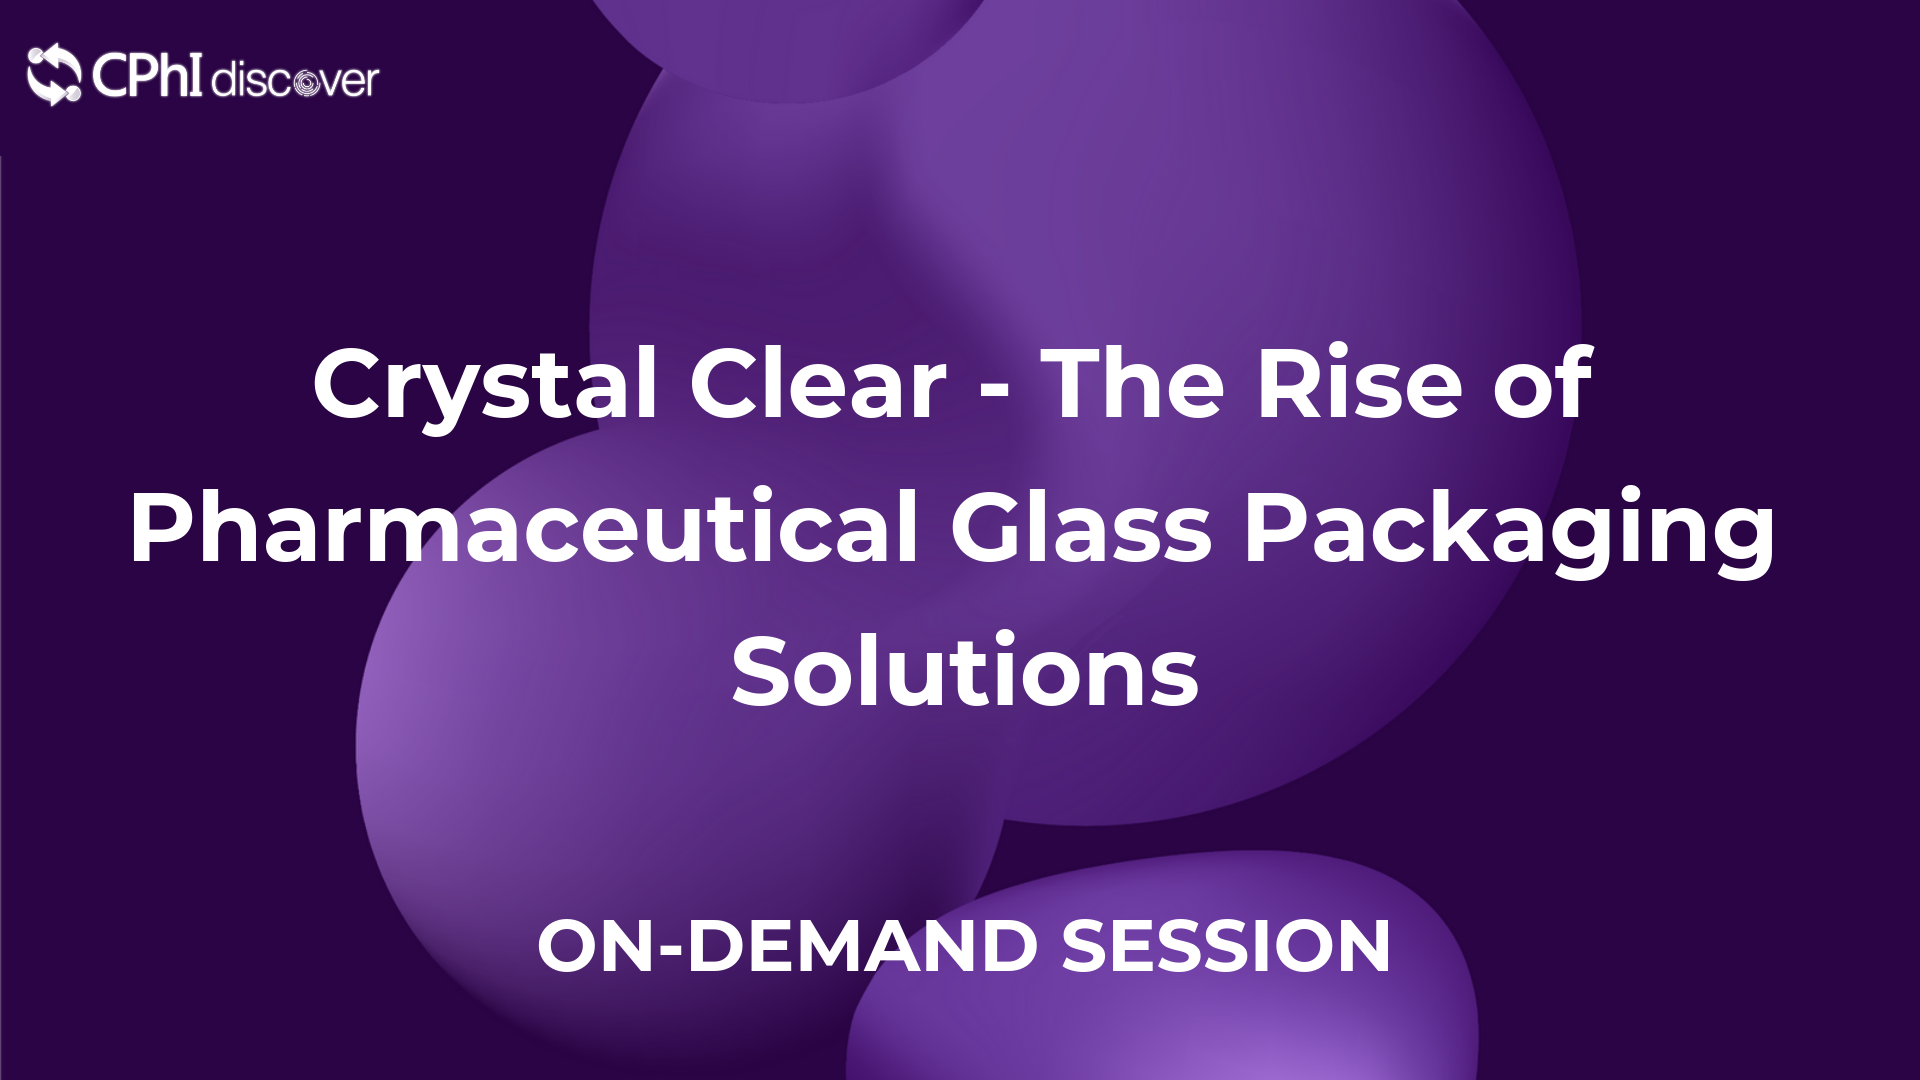 Crystal Clear - The Rise of Pharmaceutical Glass Packaging Solutions